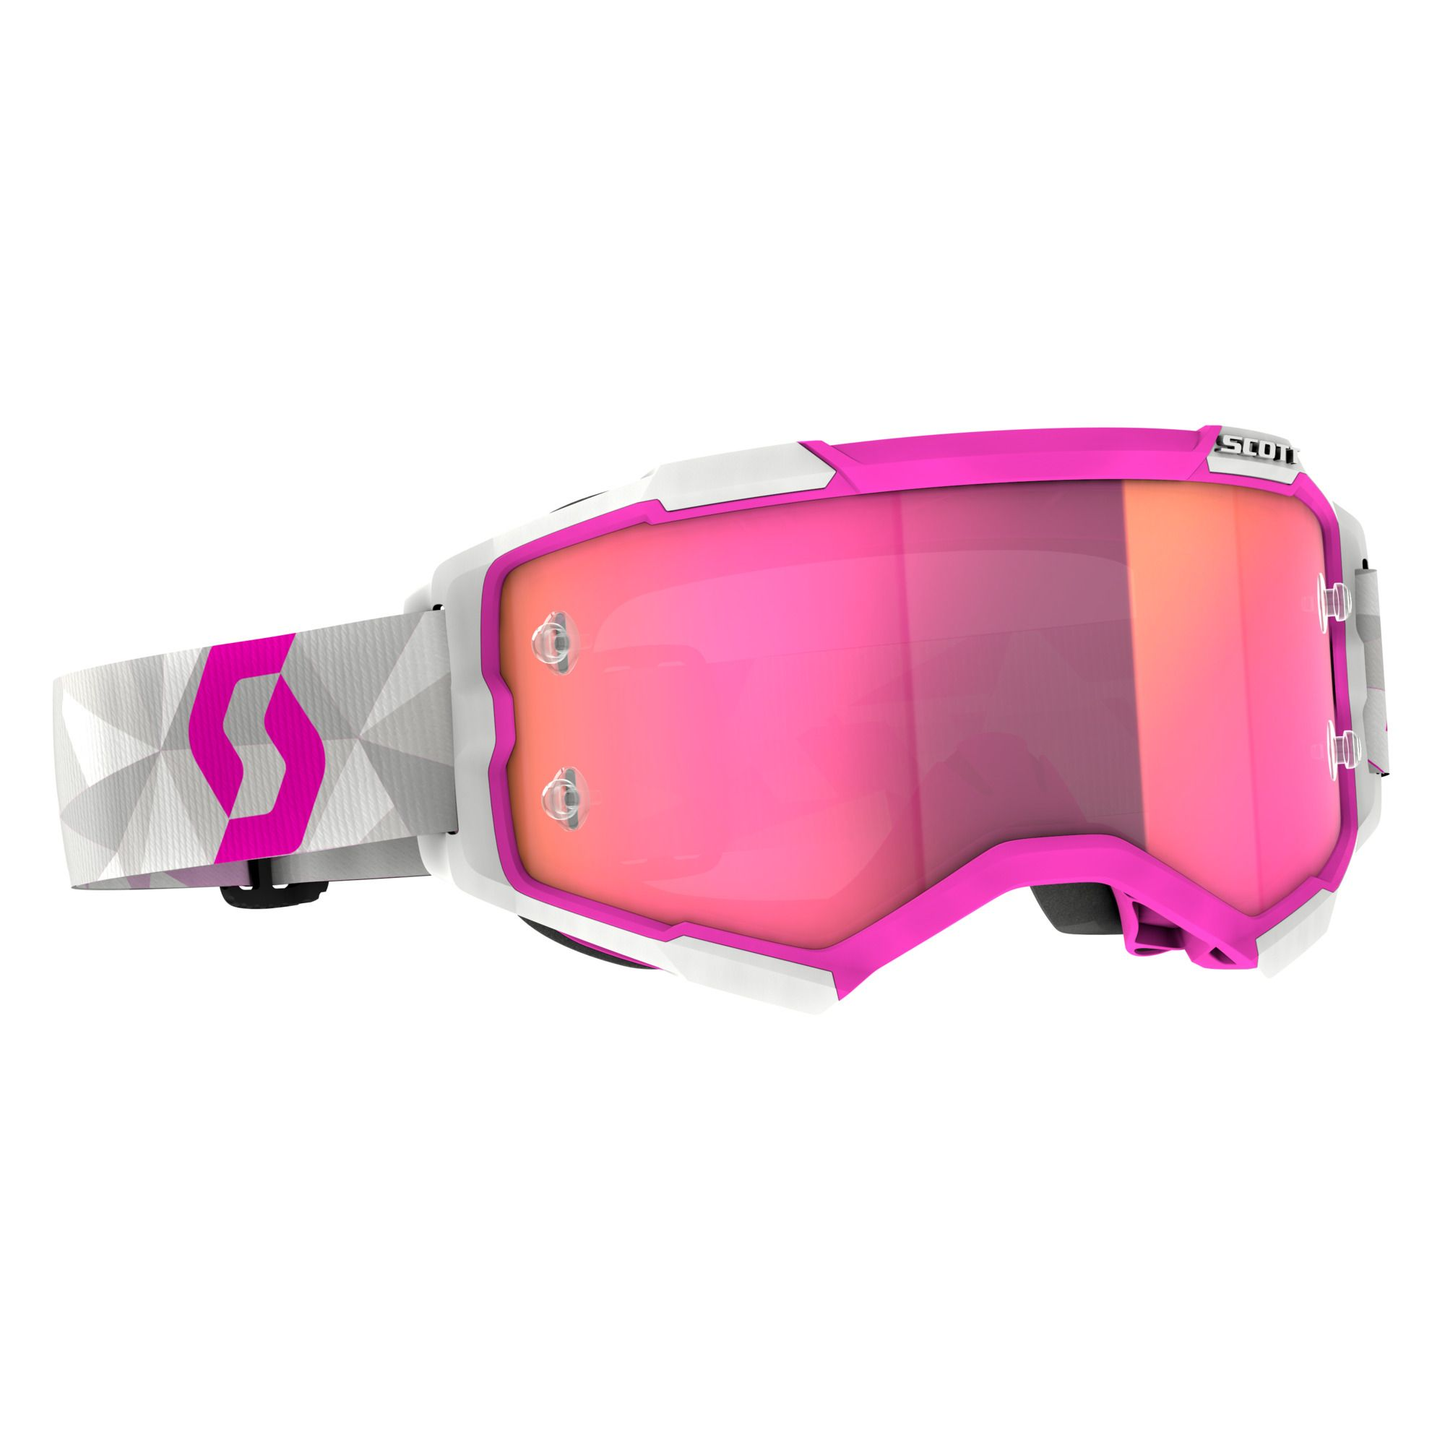 Scott Fury Goggle, JP61 Edition - Pink / White- Pink Chrome Works Lens